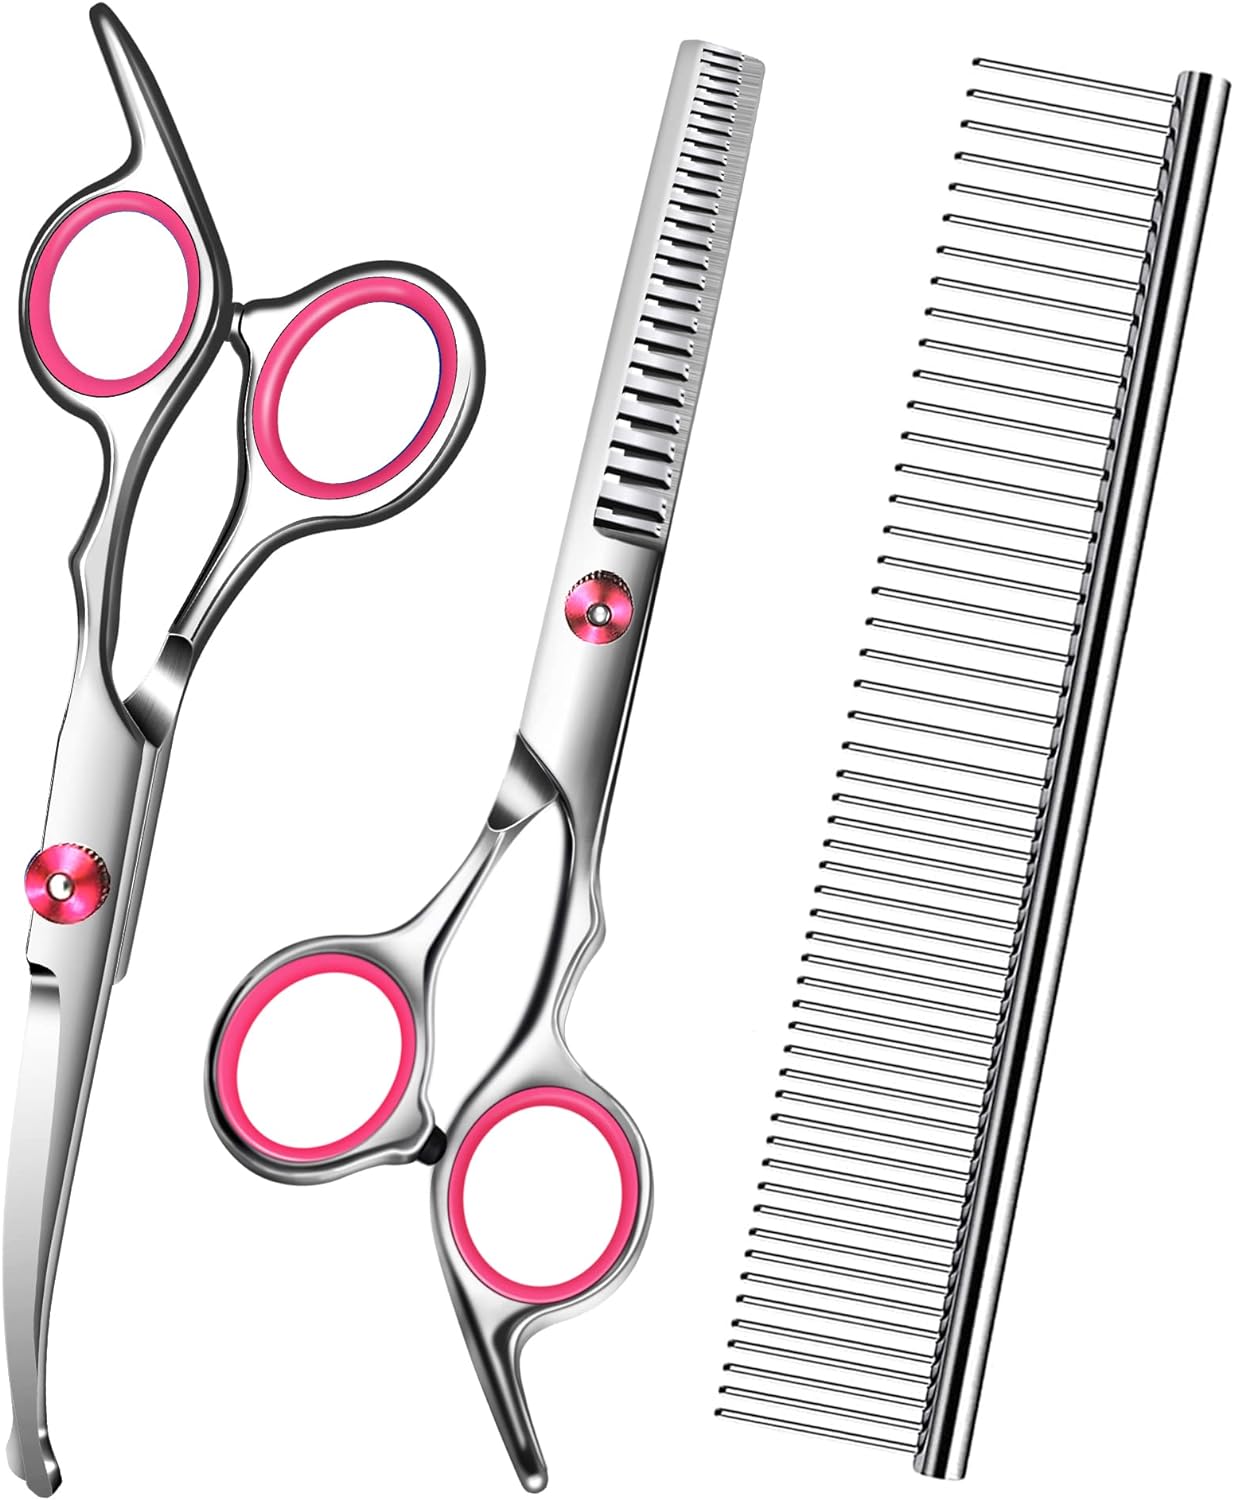 Pink Dog Grooming Scissors Review